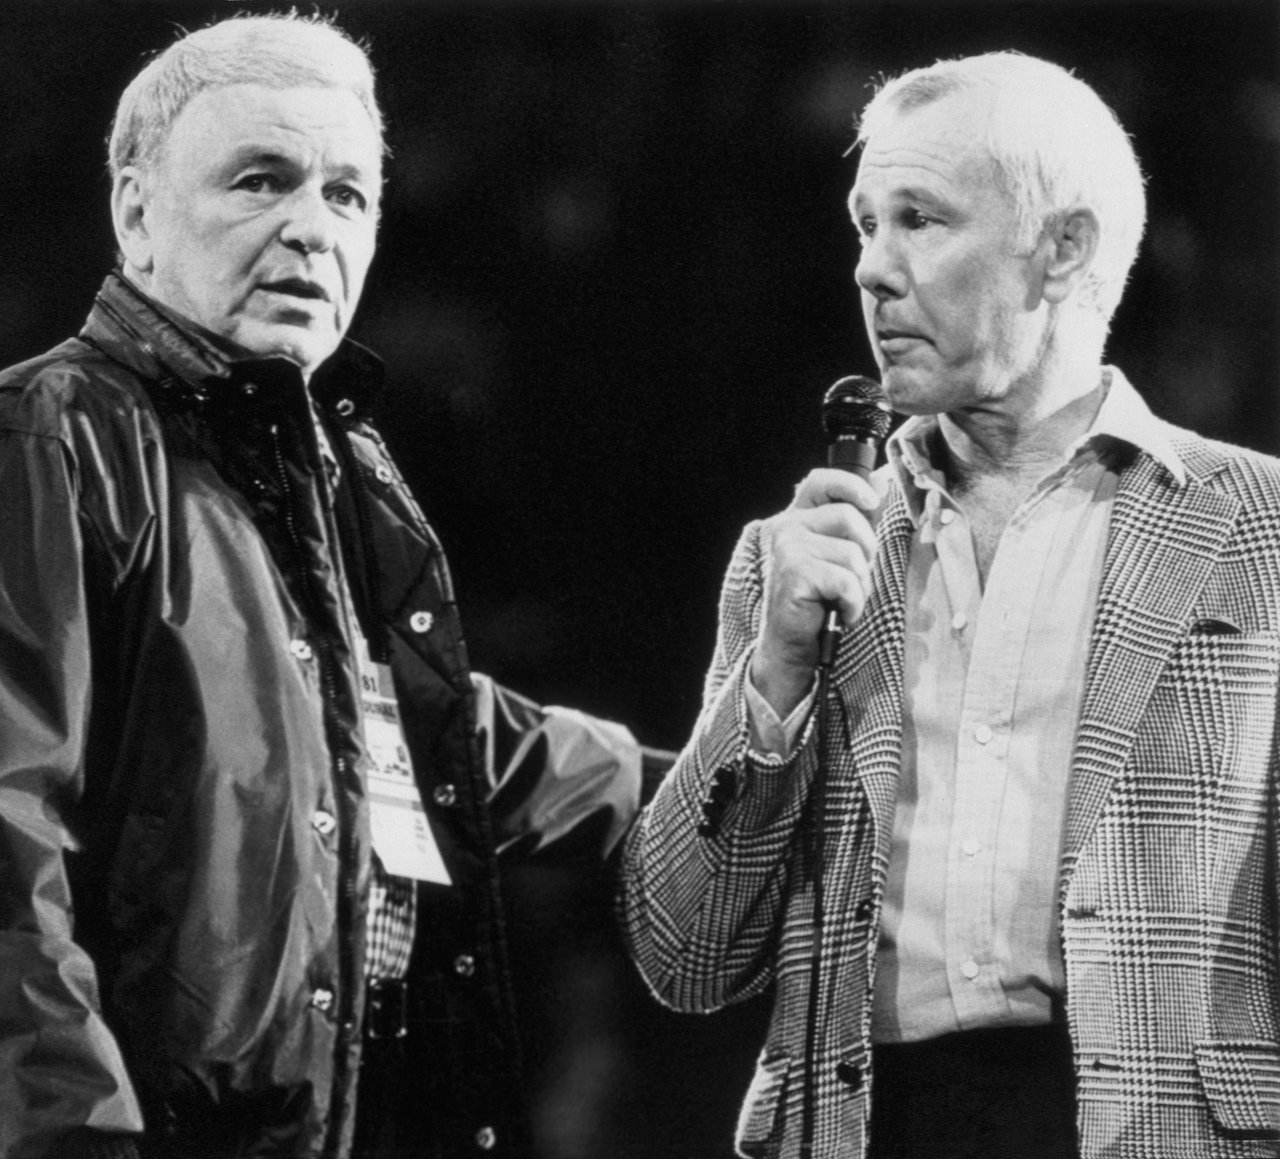 Frank Sinatra and Johnny Carson discussing stage instructions in 1981